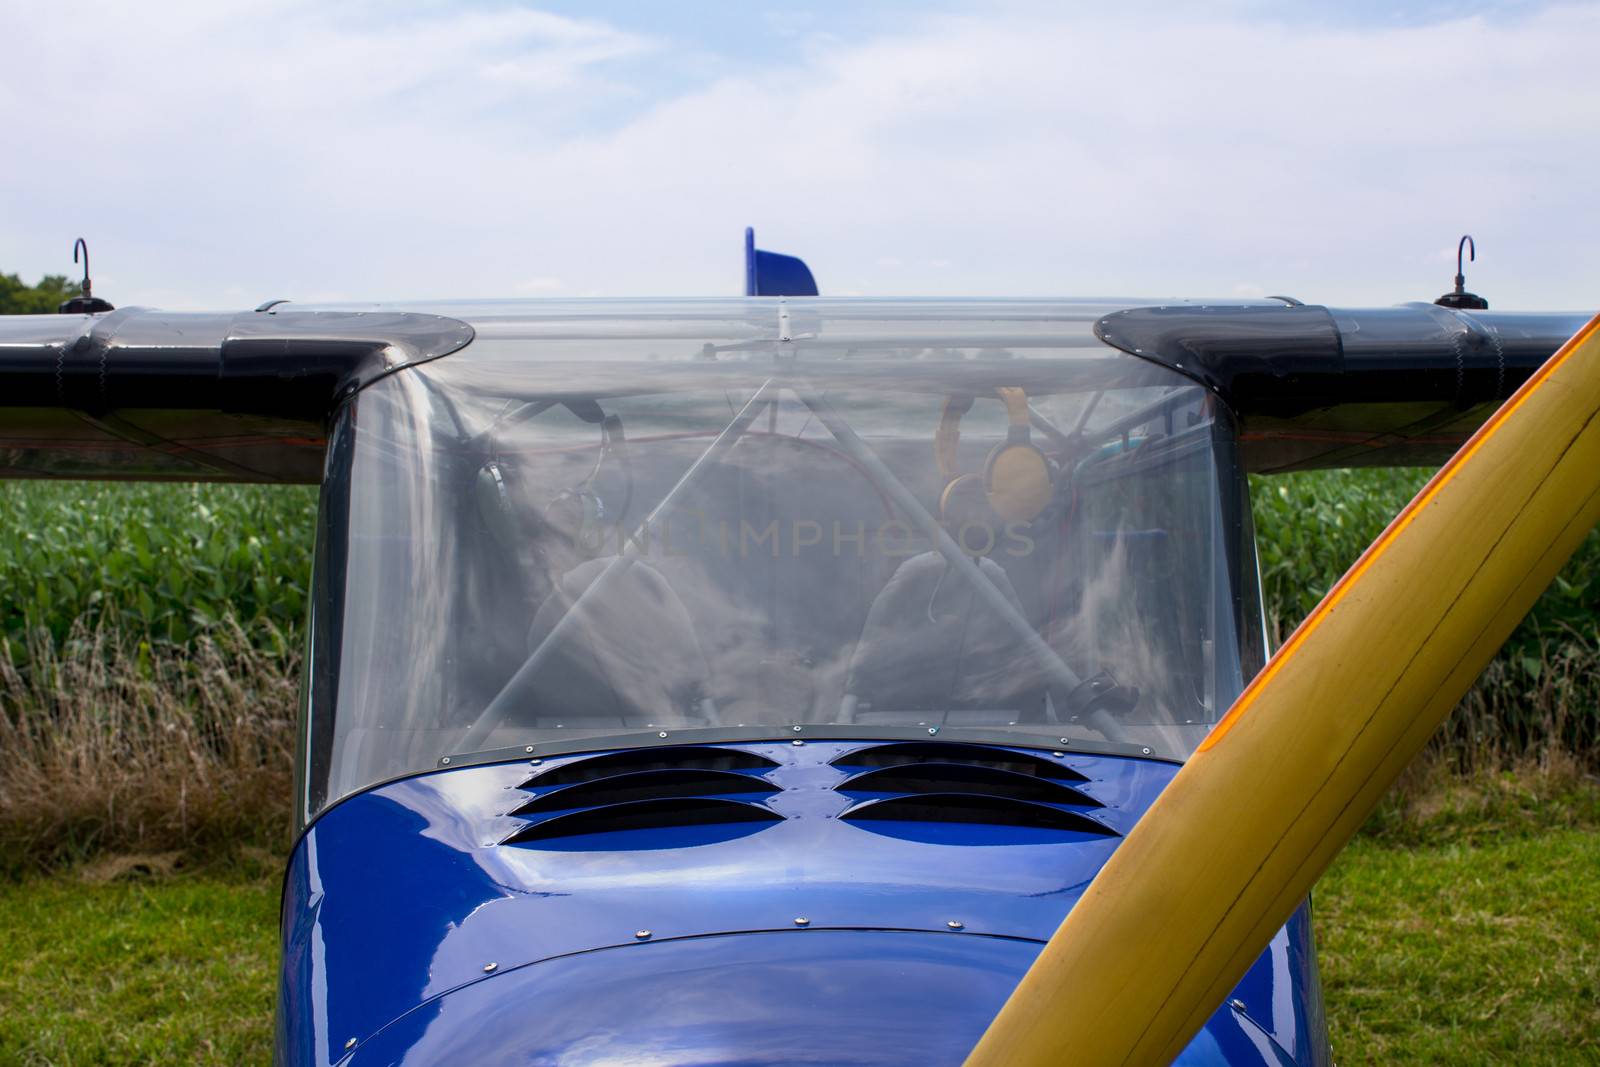 View past the propeller of the windshield, support struts and cockpit of a small fixed wing aircraft parked in a field